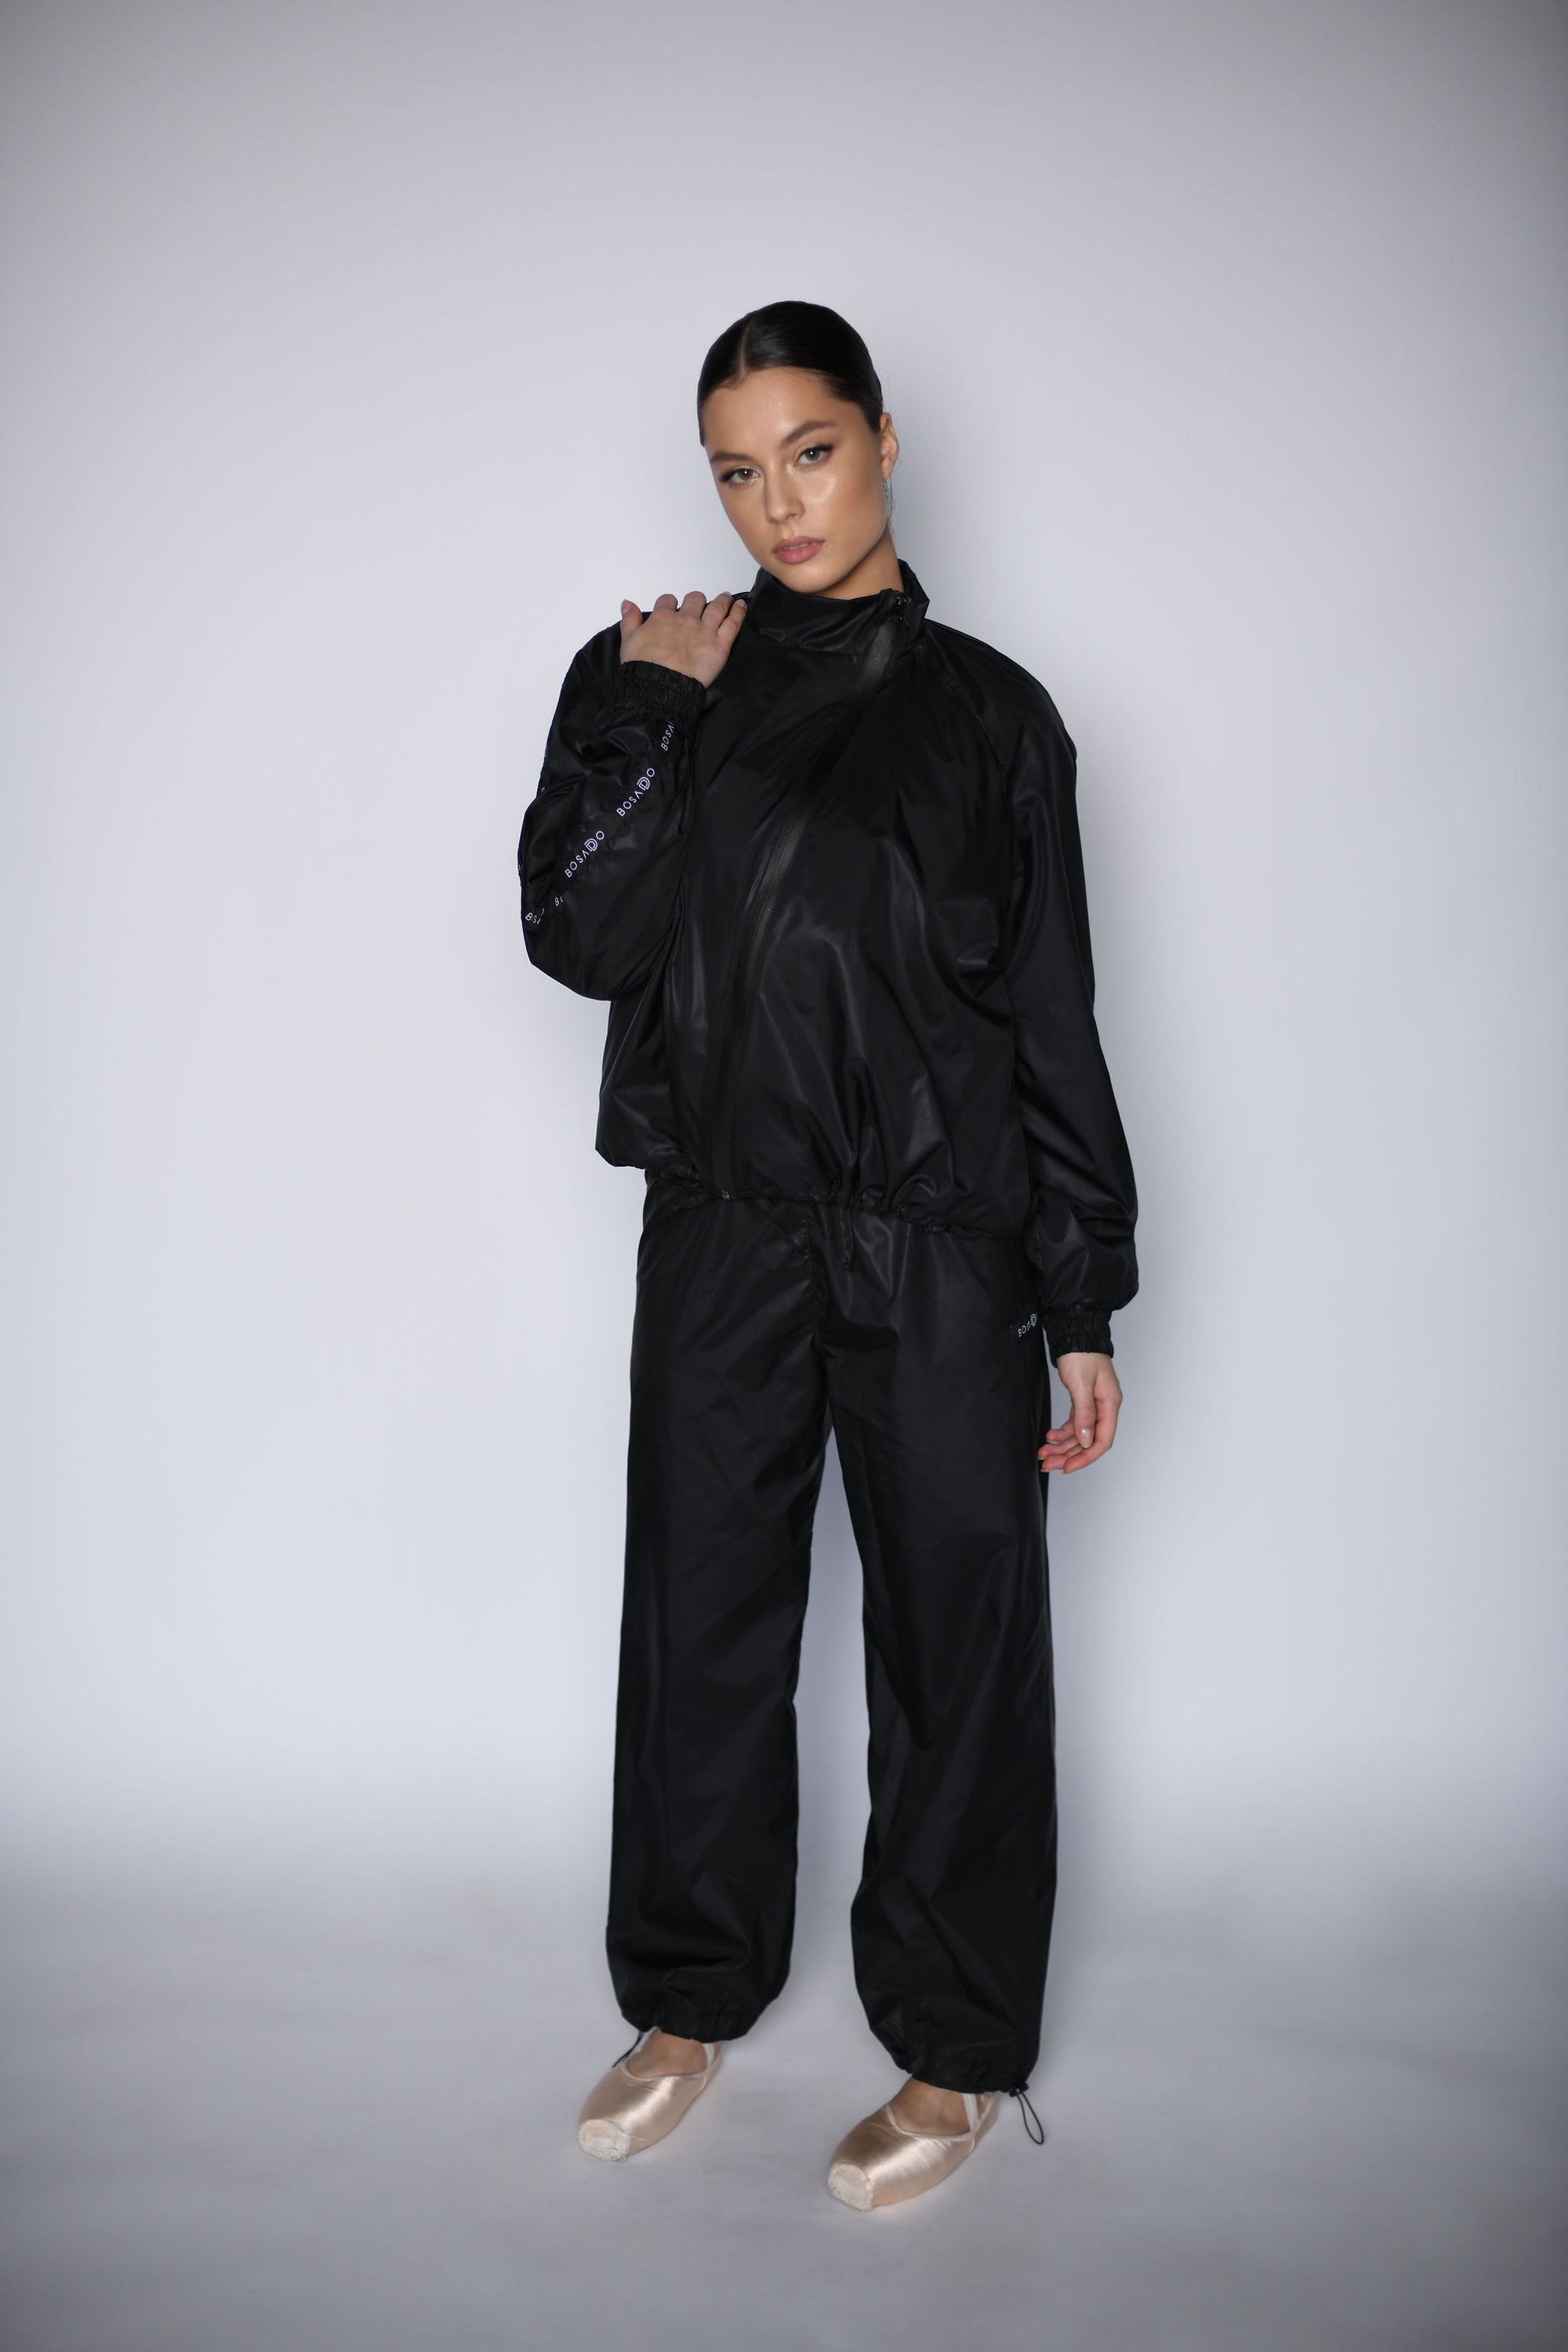 NEW URBAN SWAN COLLECTION S/S 23 | Black pearl sports suit with pants + shorts